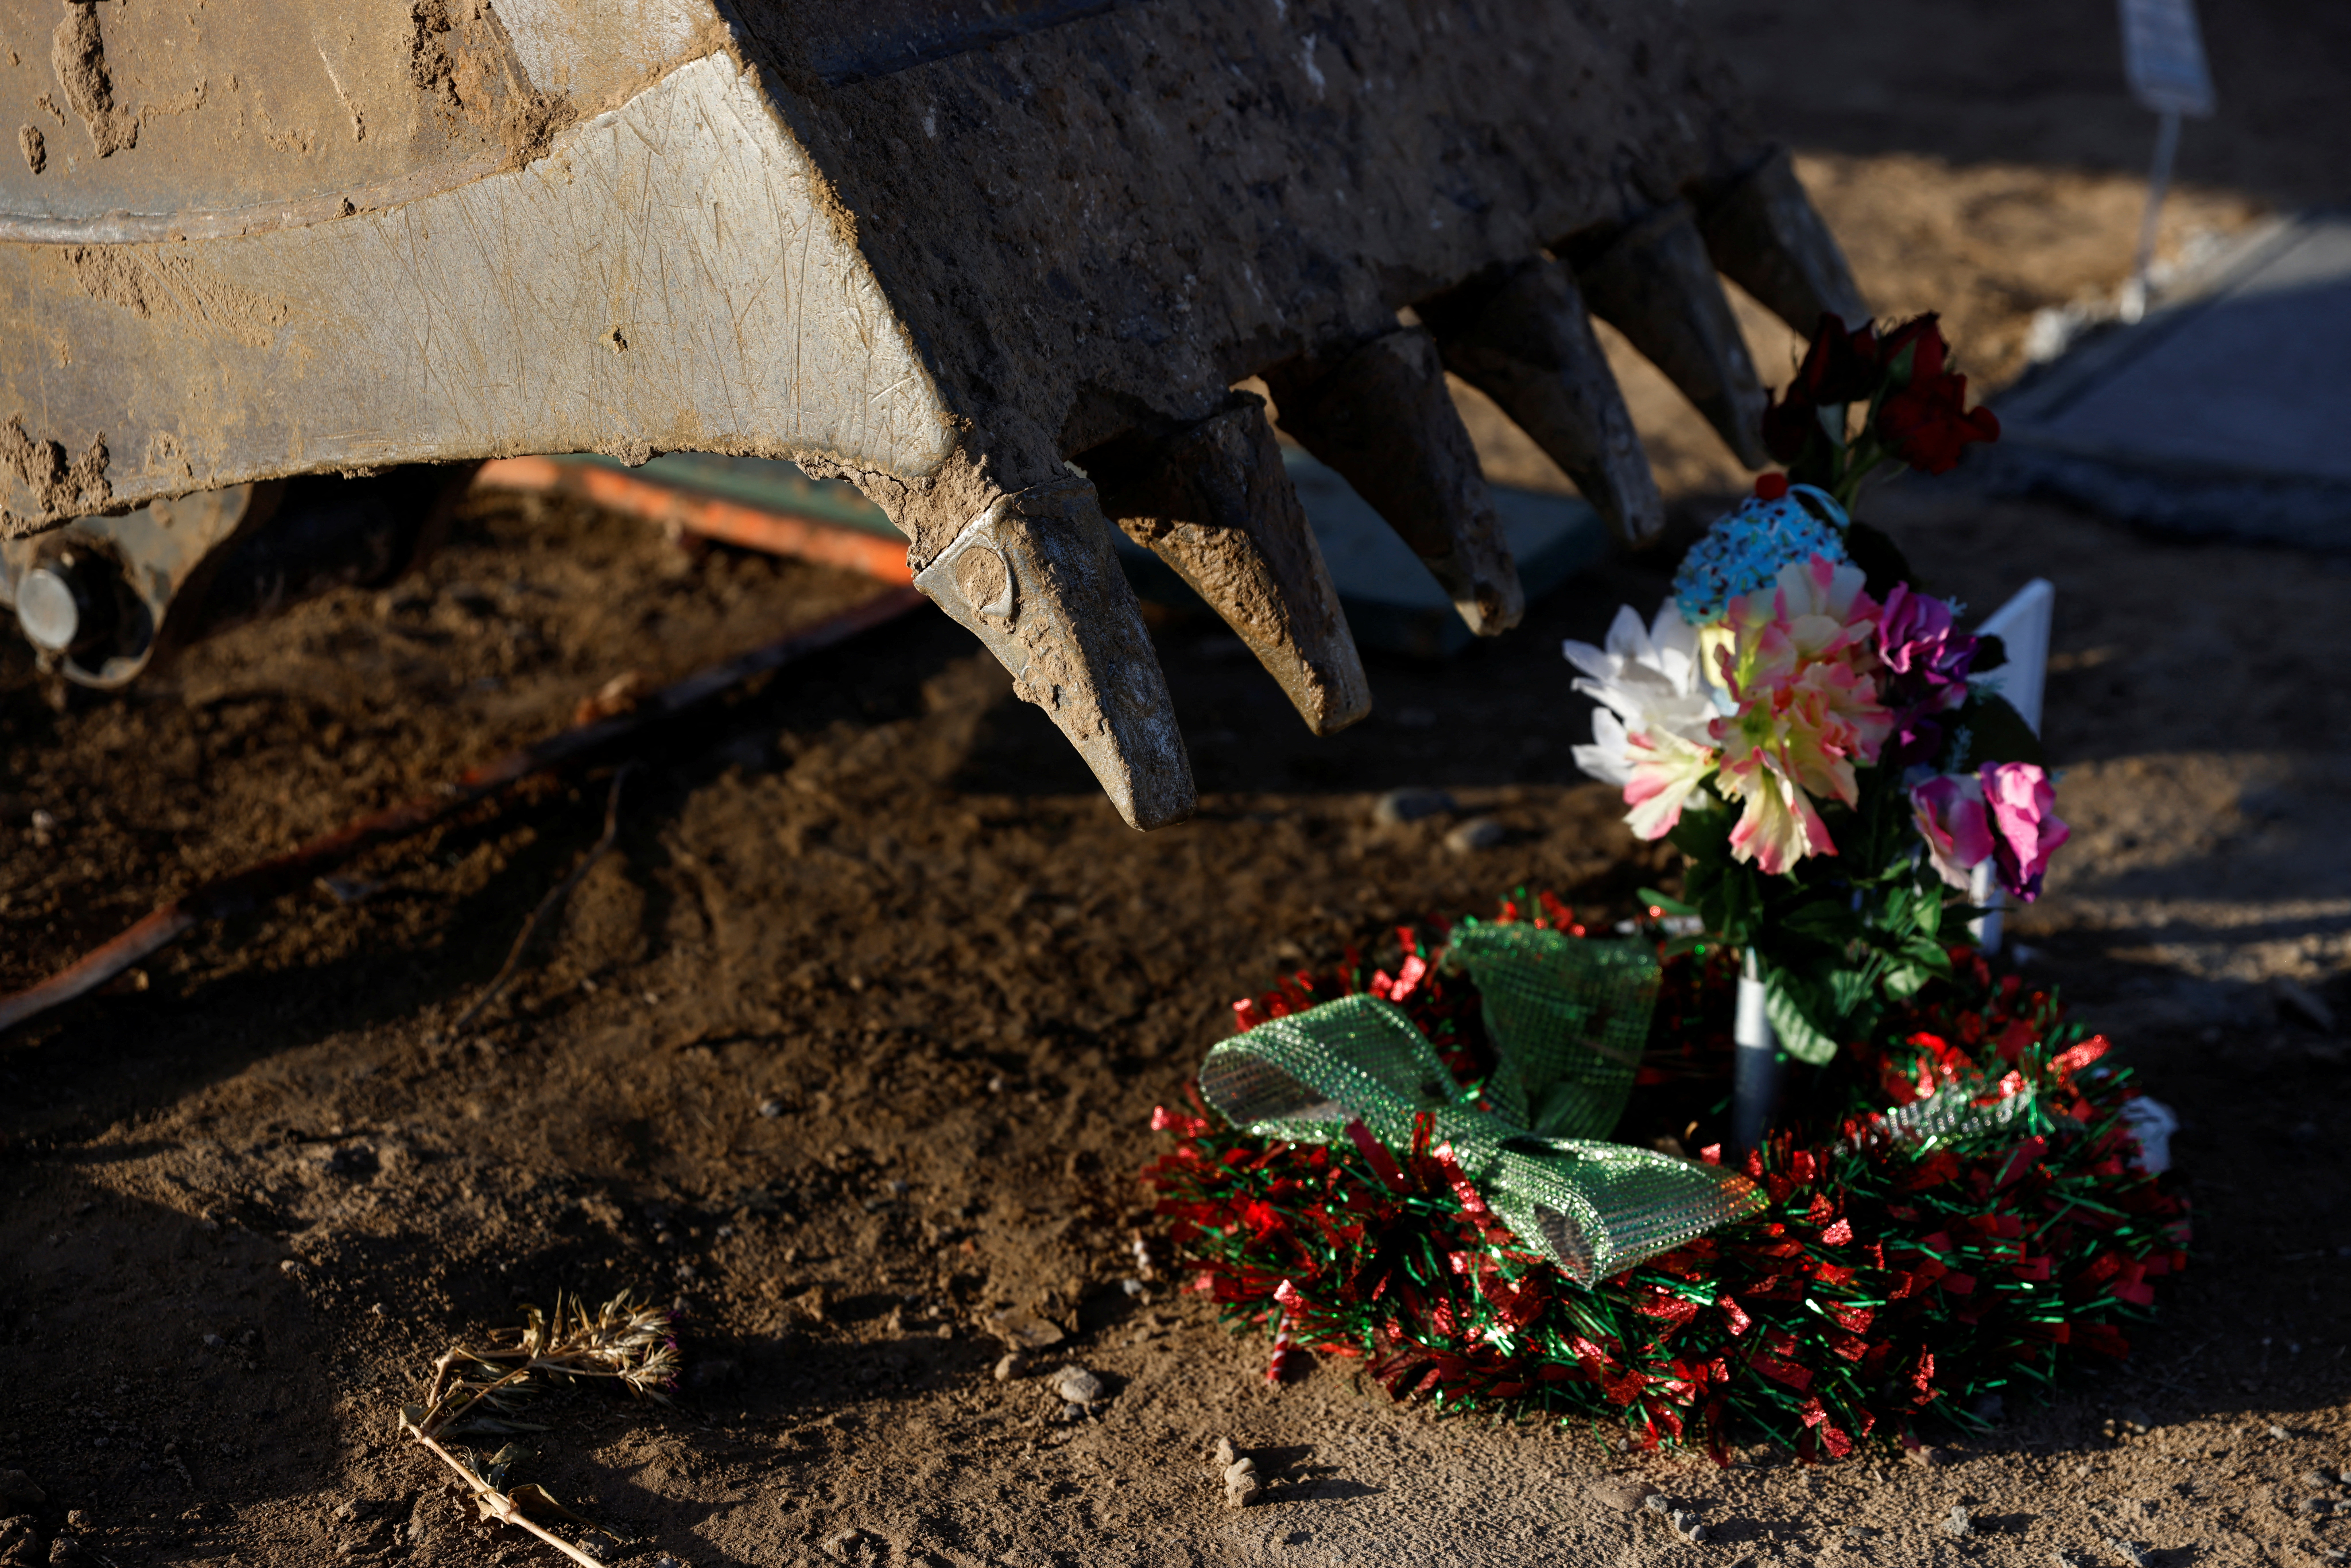 Rural New Mexico county where COVID-19 deaths are becoming normal at Farmington Funeral Home